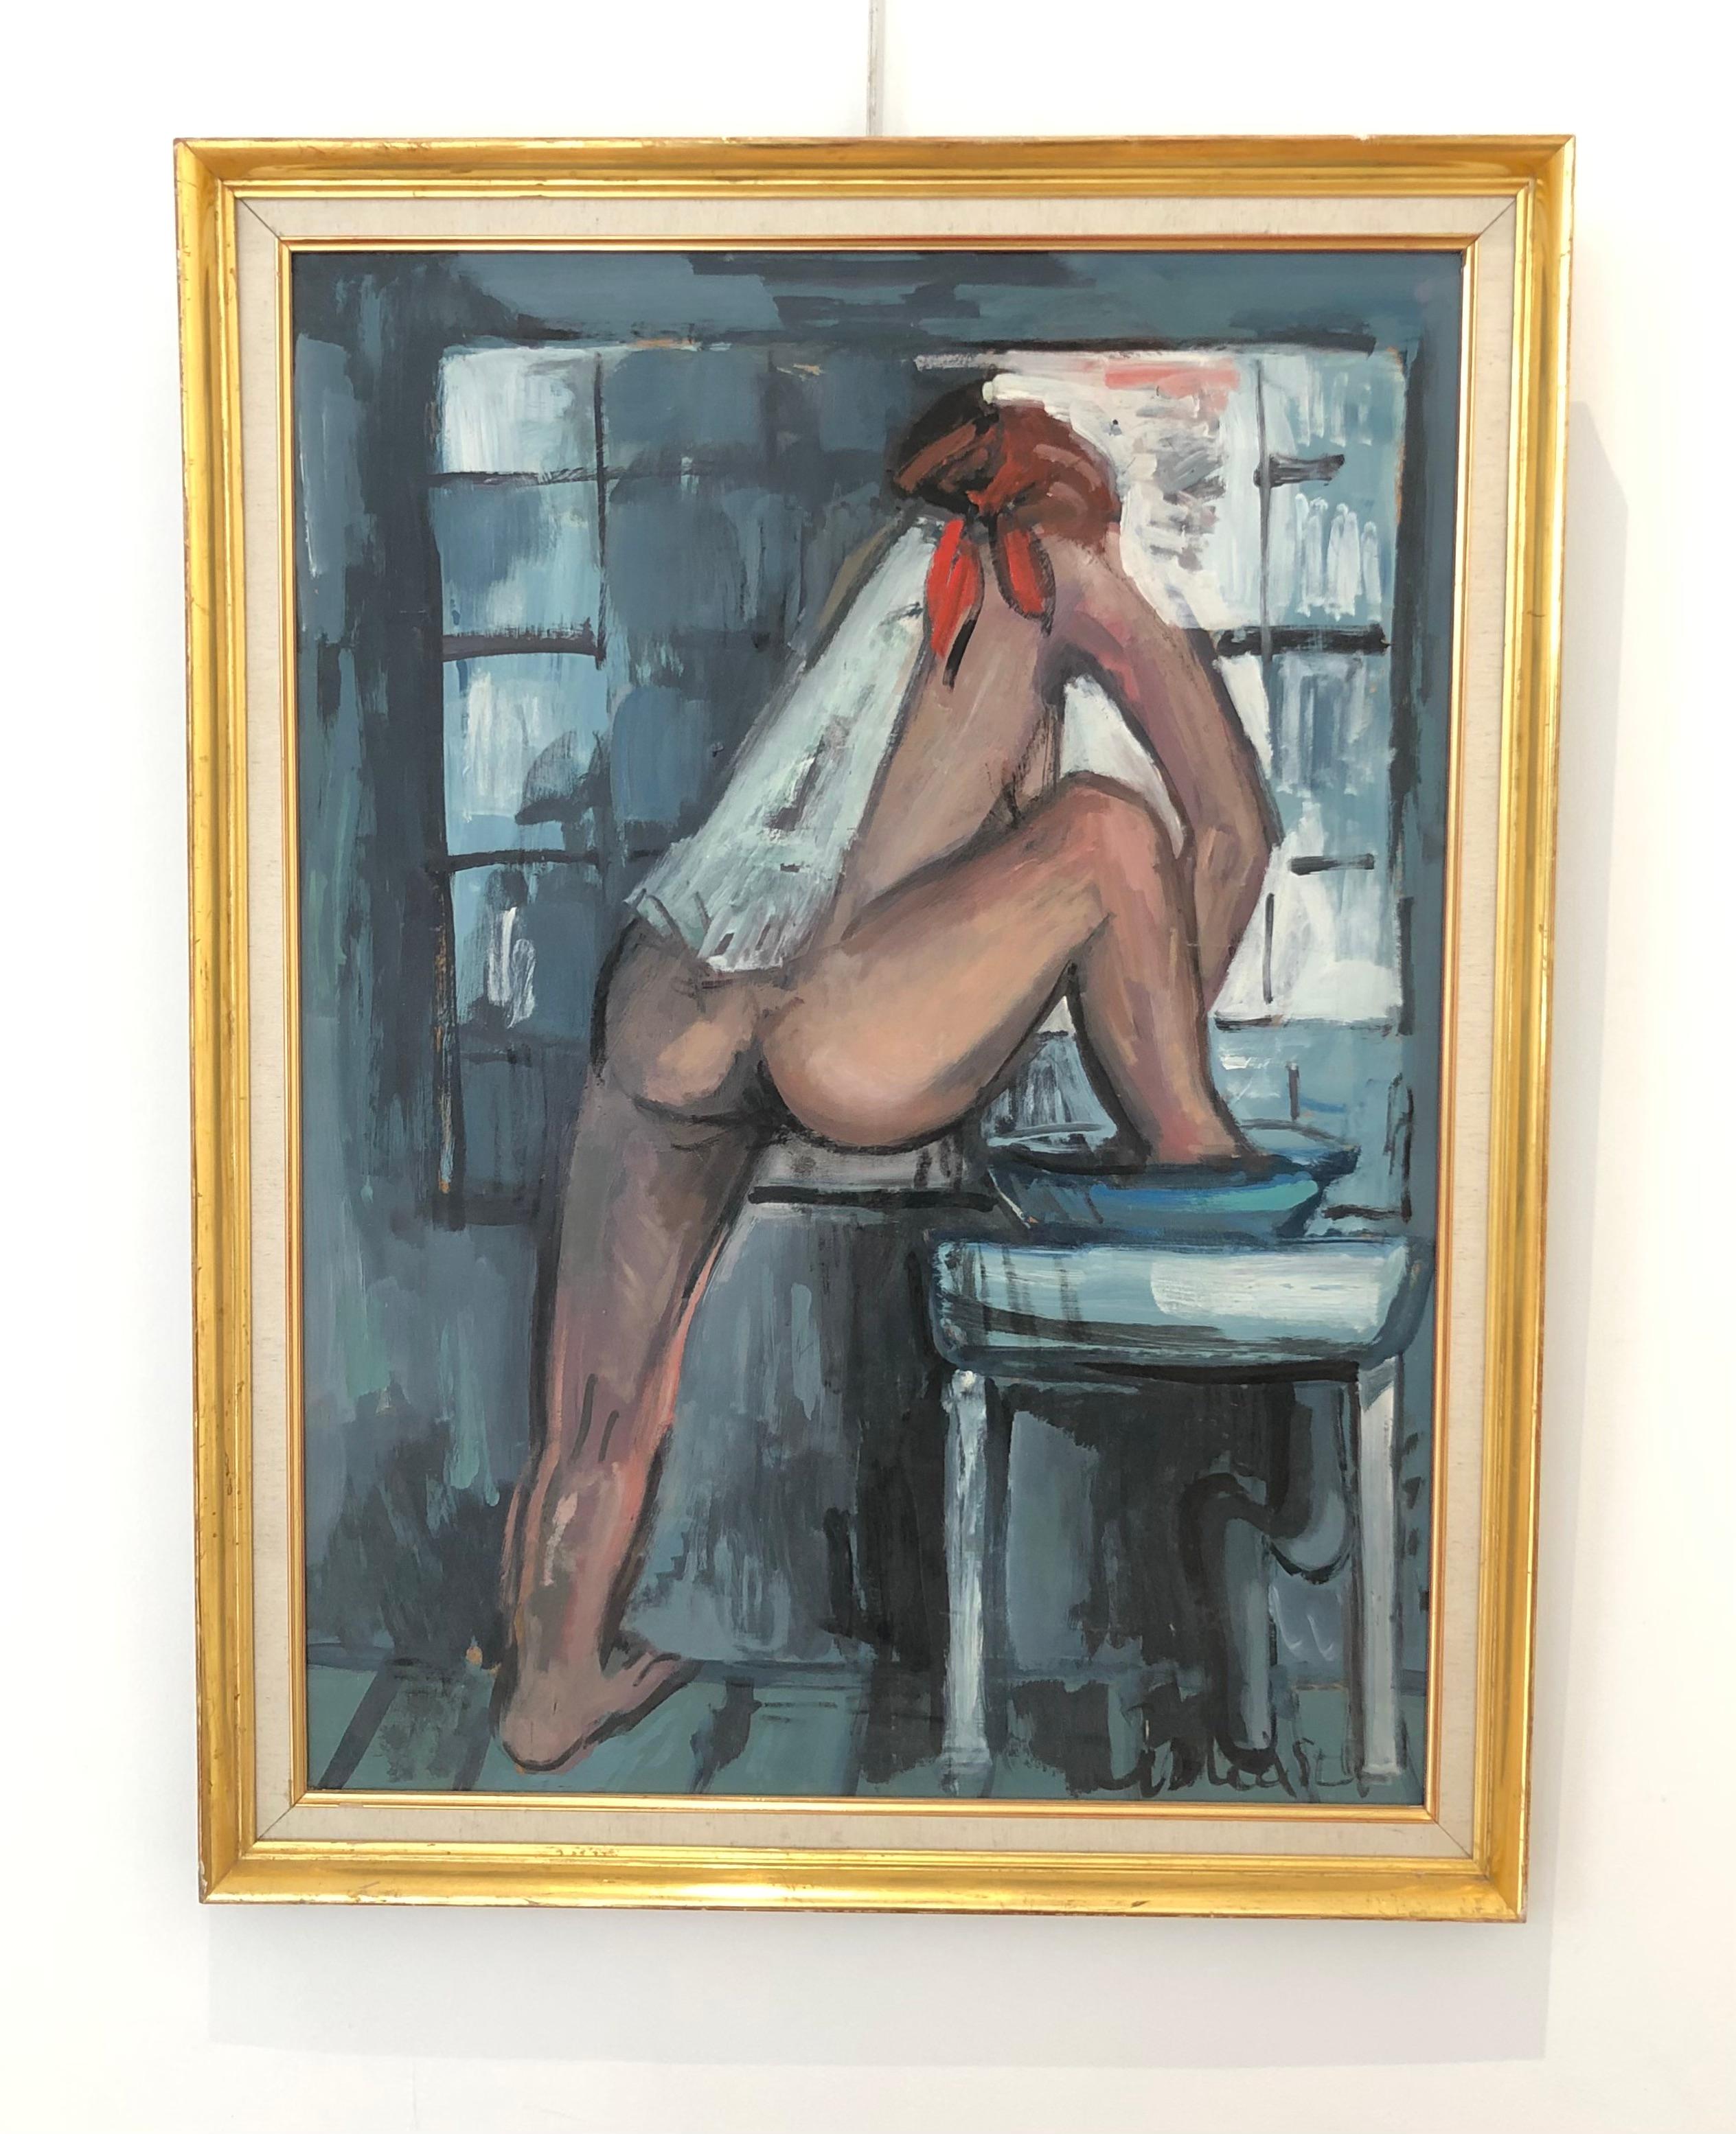 The toilet - Painting by William Goliasch